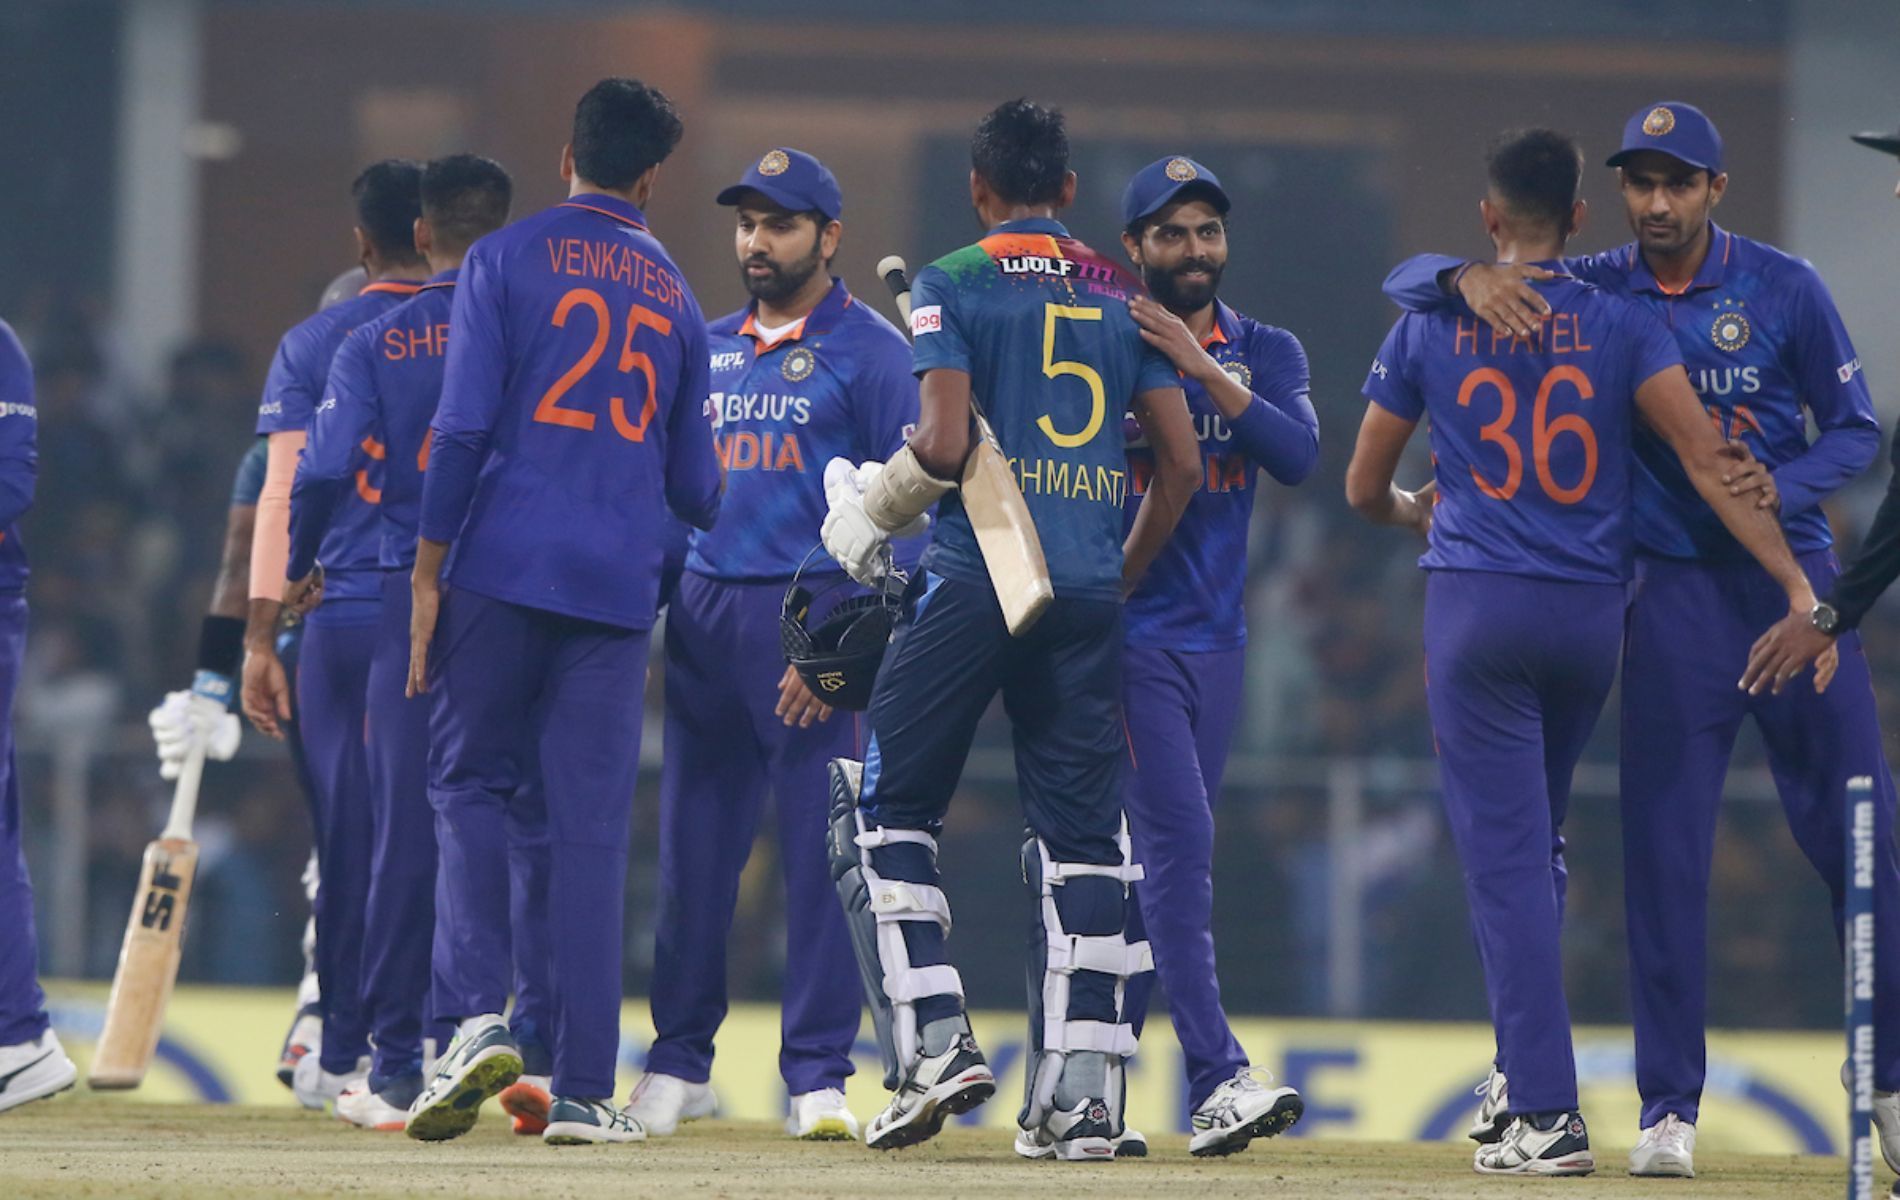 India have an unassailable 2-0 lead in the T20I series against Sri Lanka.